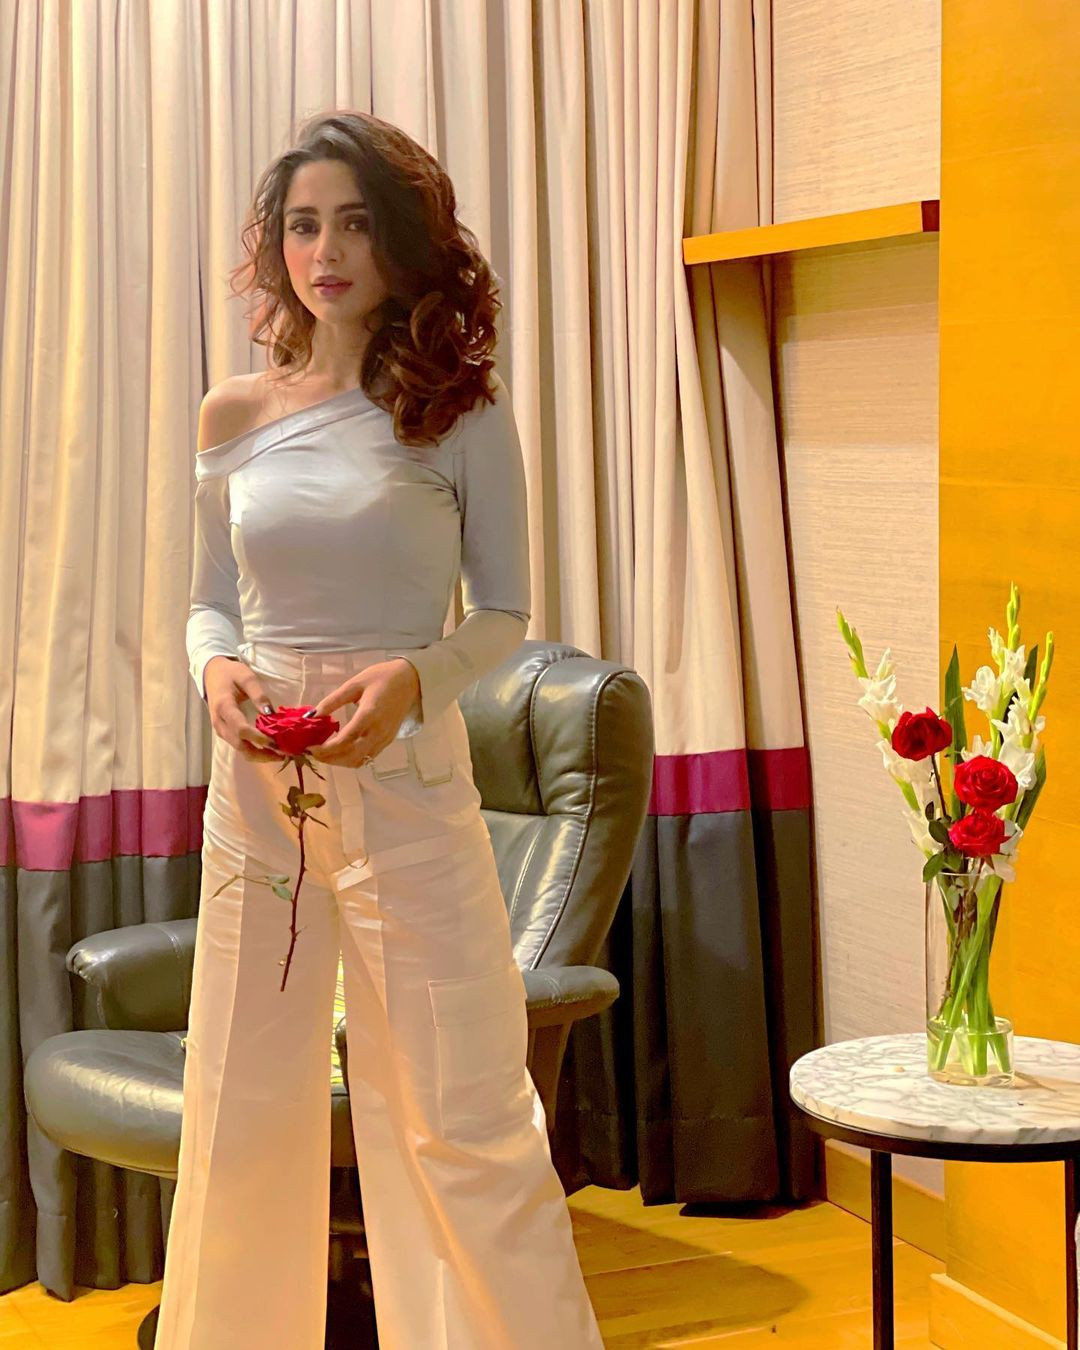 Four times Aima Baig proved to be a style icon